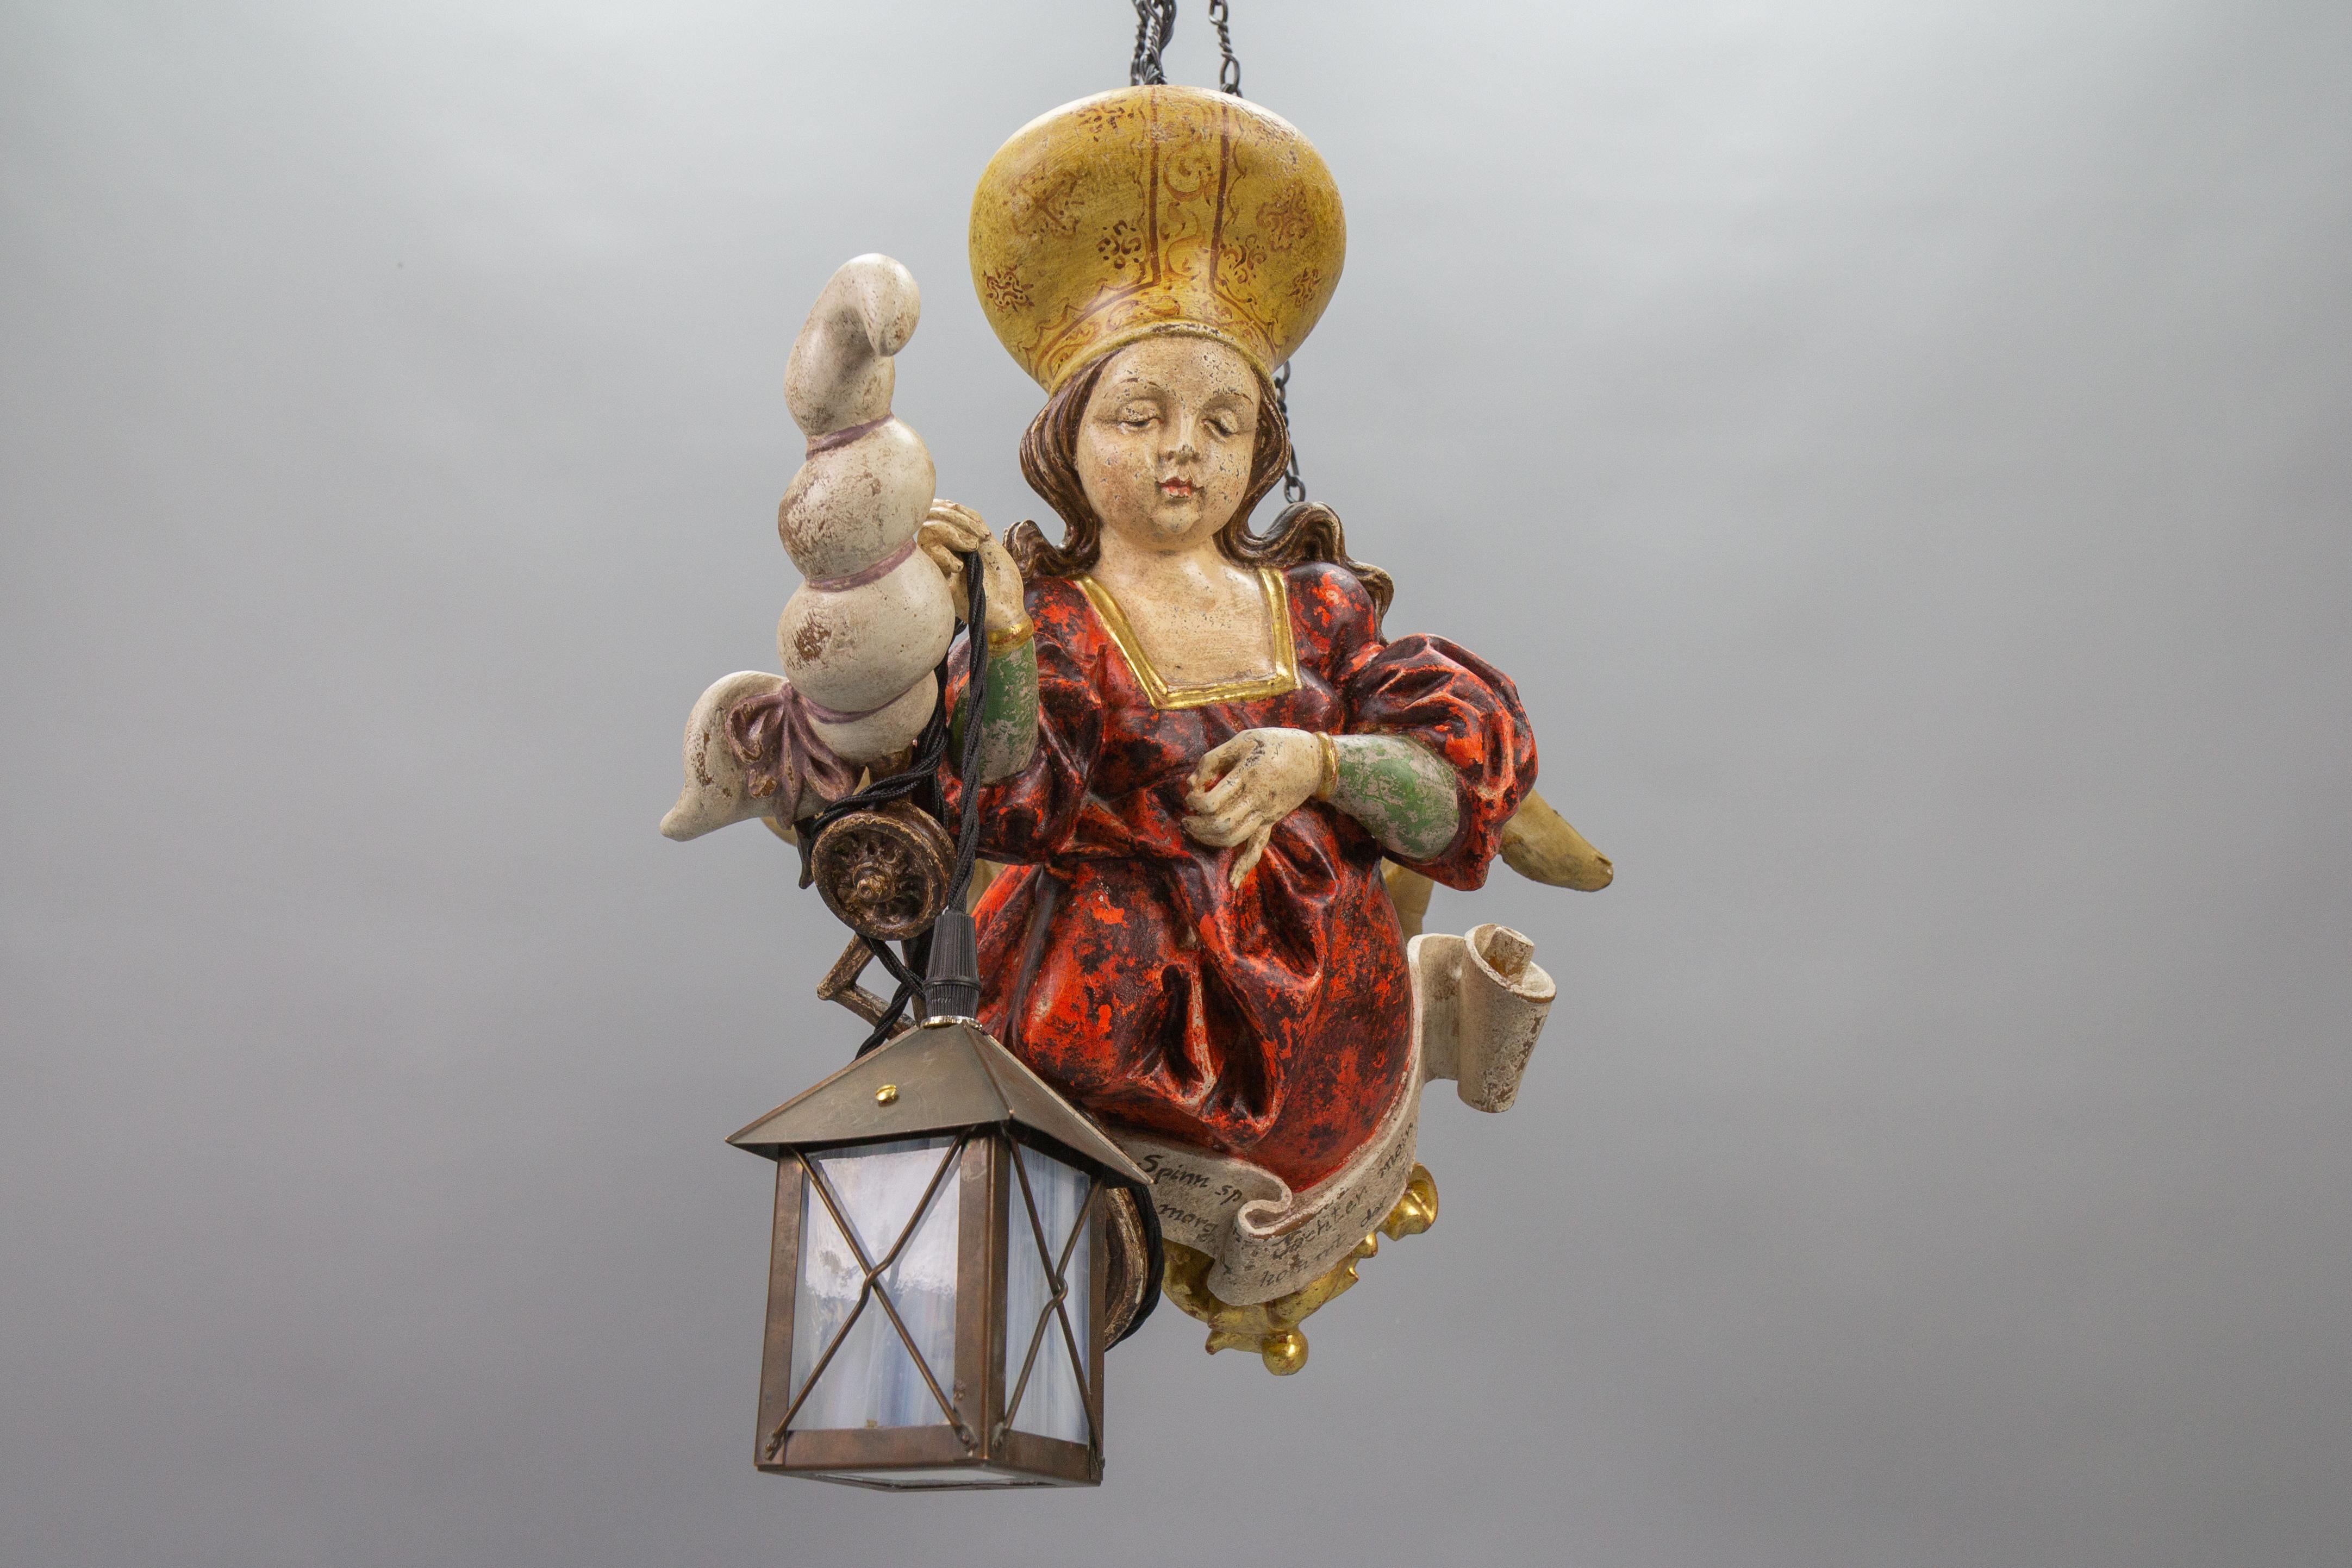 Antique German Pendant Light Wooden Polychrome Lüsterweibchen with Lantern, from circa 1920.
This adorable and compact size Lüsterweibchen - chandelier features a masterfully carved figure of a young lady in a red dress with a spinning wheel,